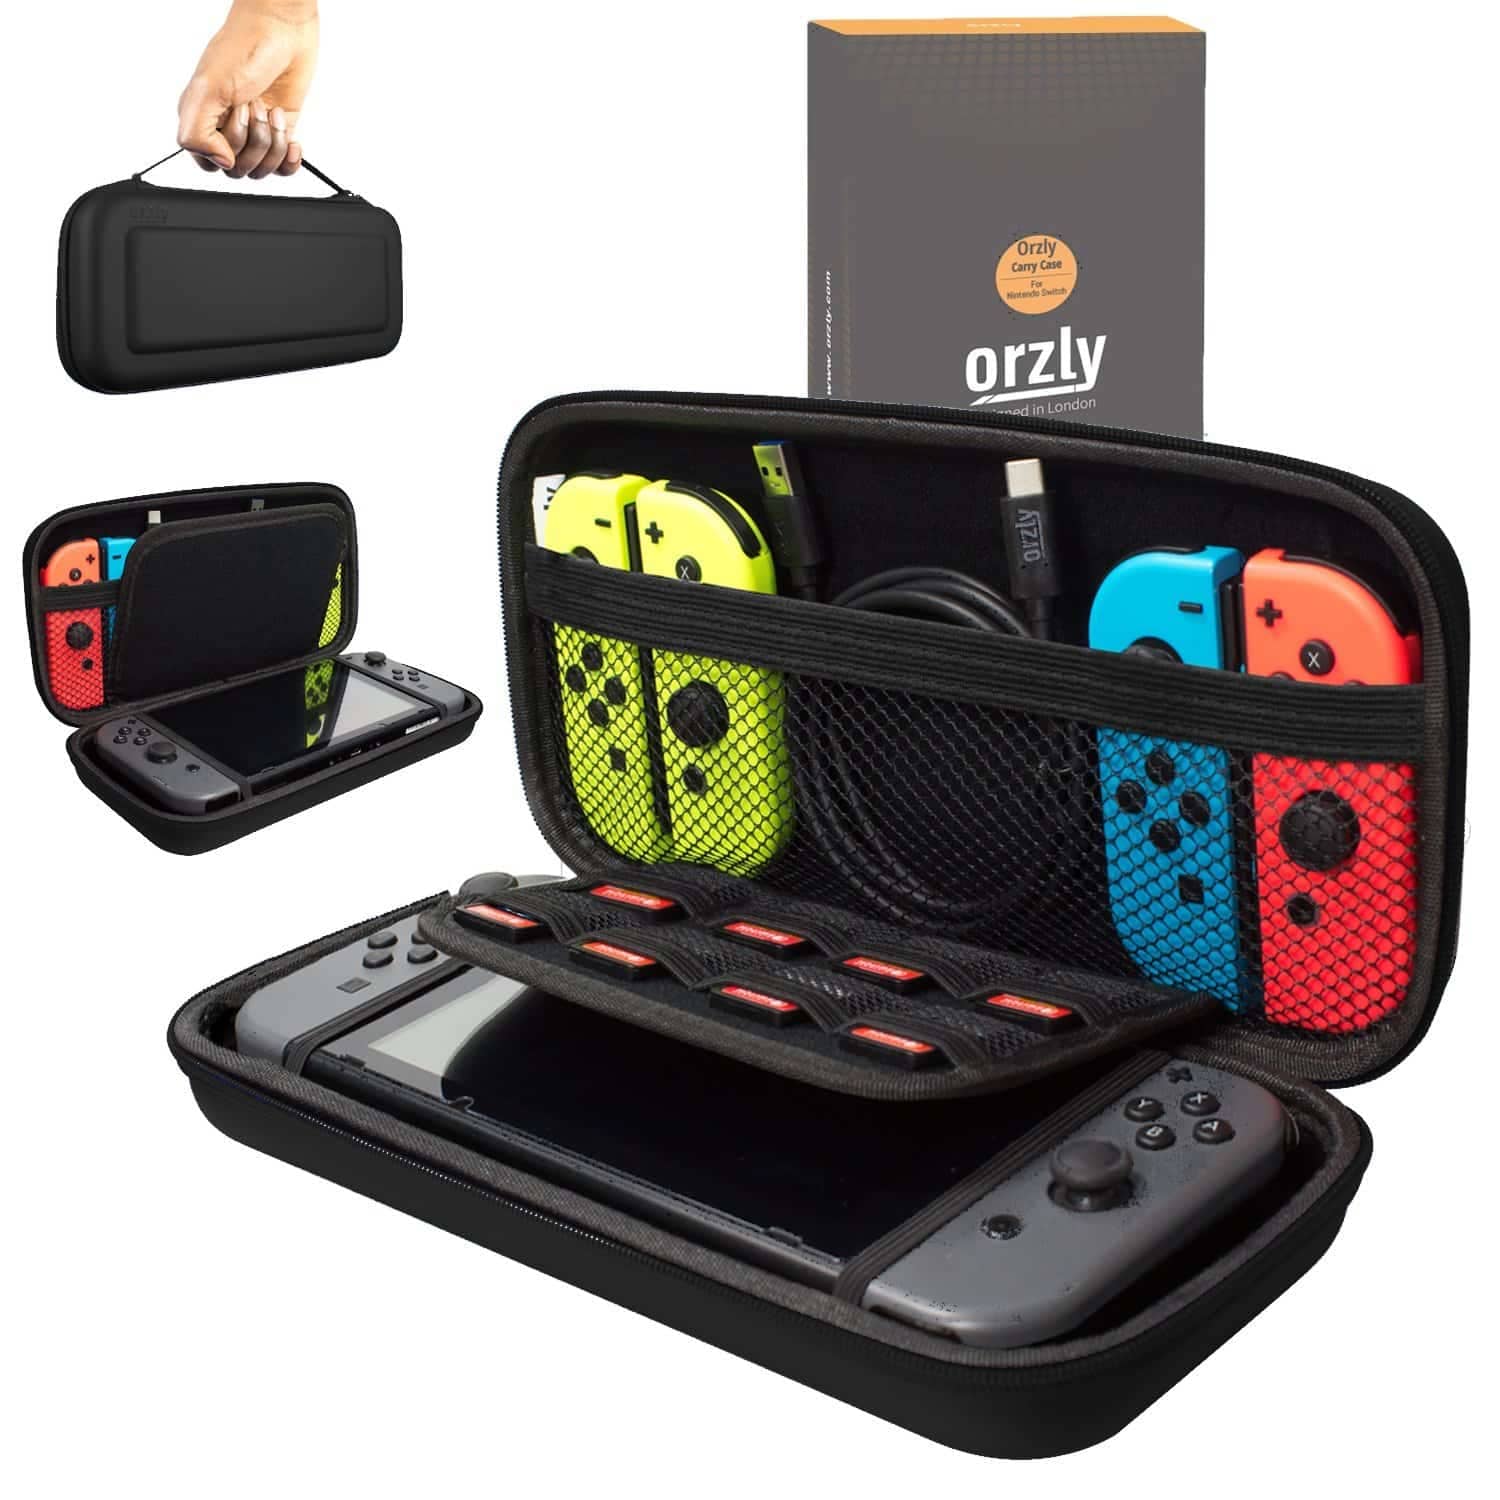 Orzly - best switch carrying case